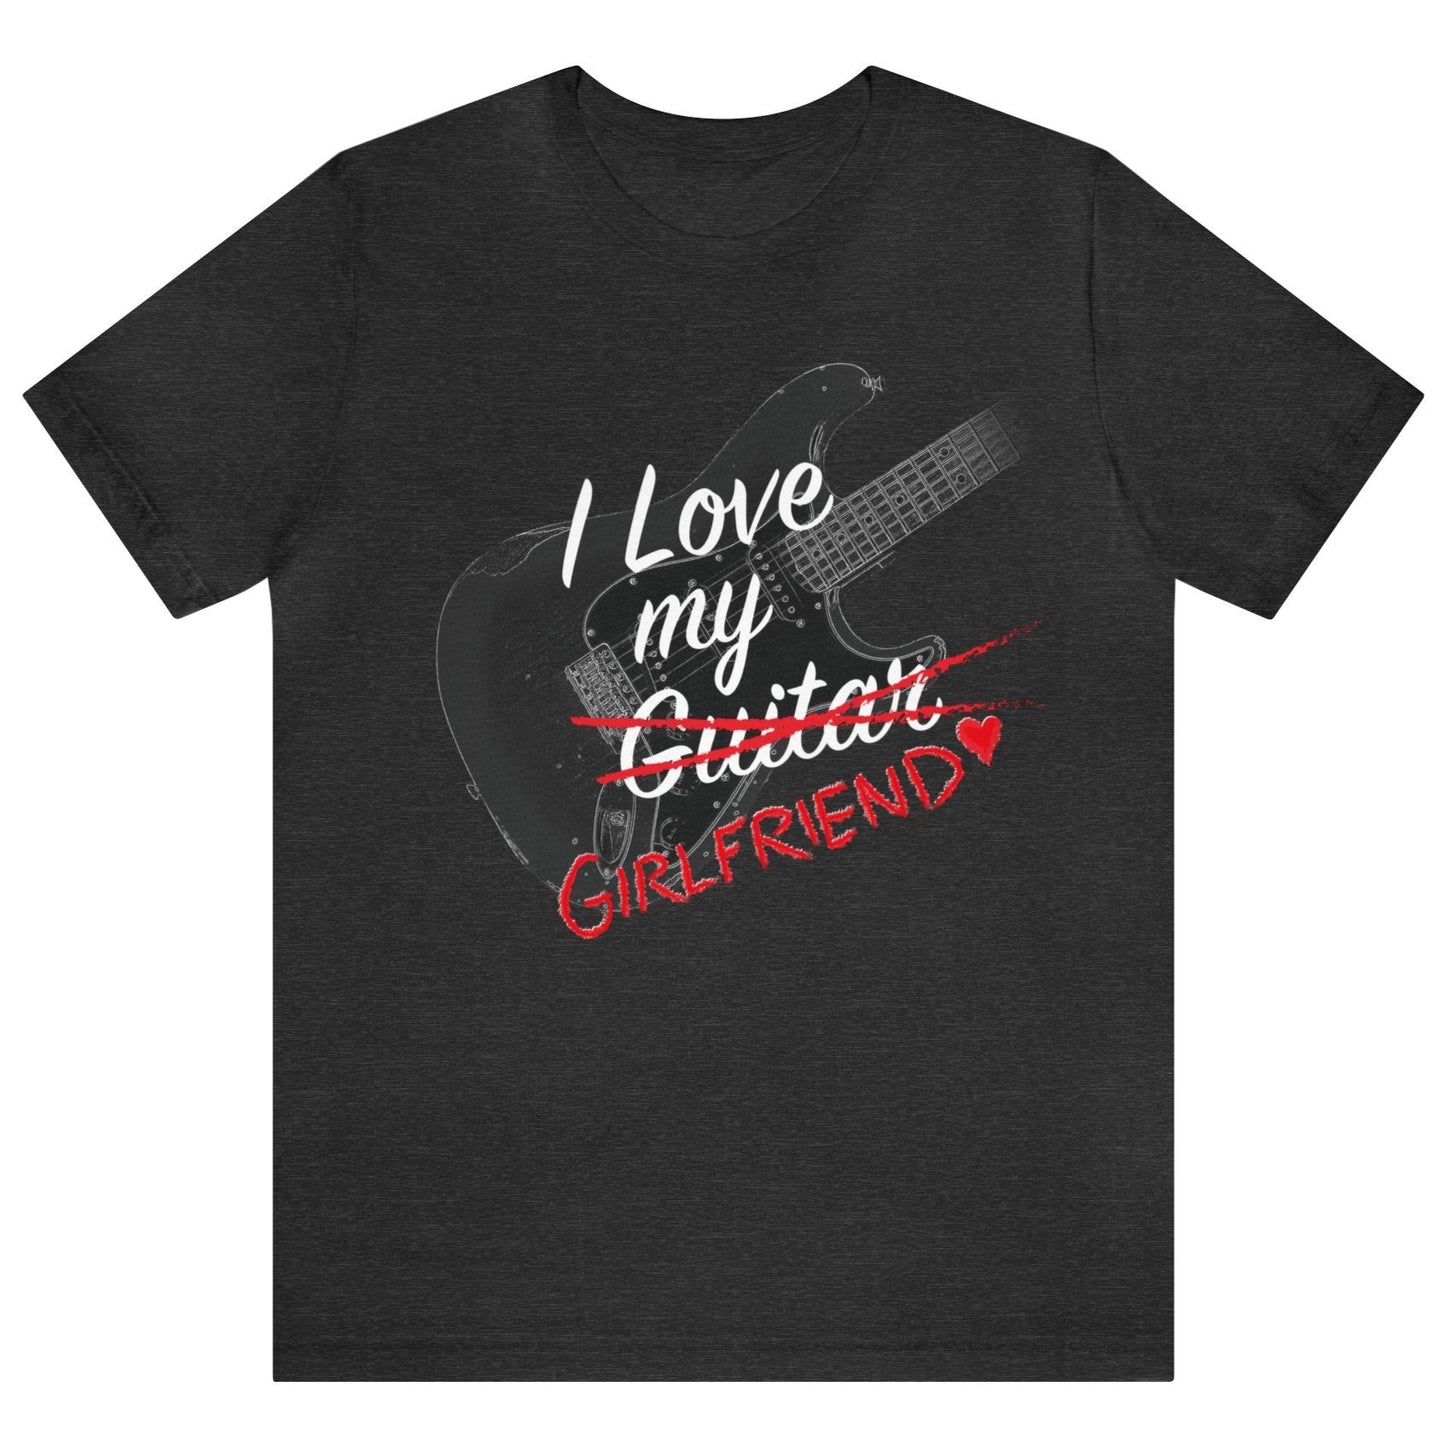 I LOVE My GIRLFRIEND (Guitar), T-Shirt for Boyfriend, Valentine's Day Gift, Stratocaster on Unisex Bella+Canvas Tee, Gift for Guitar Player